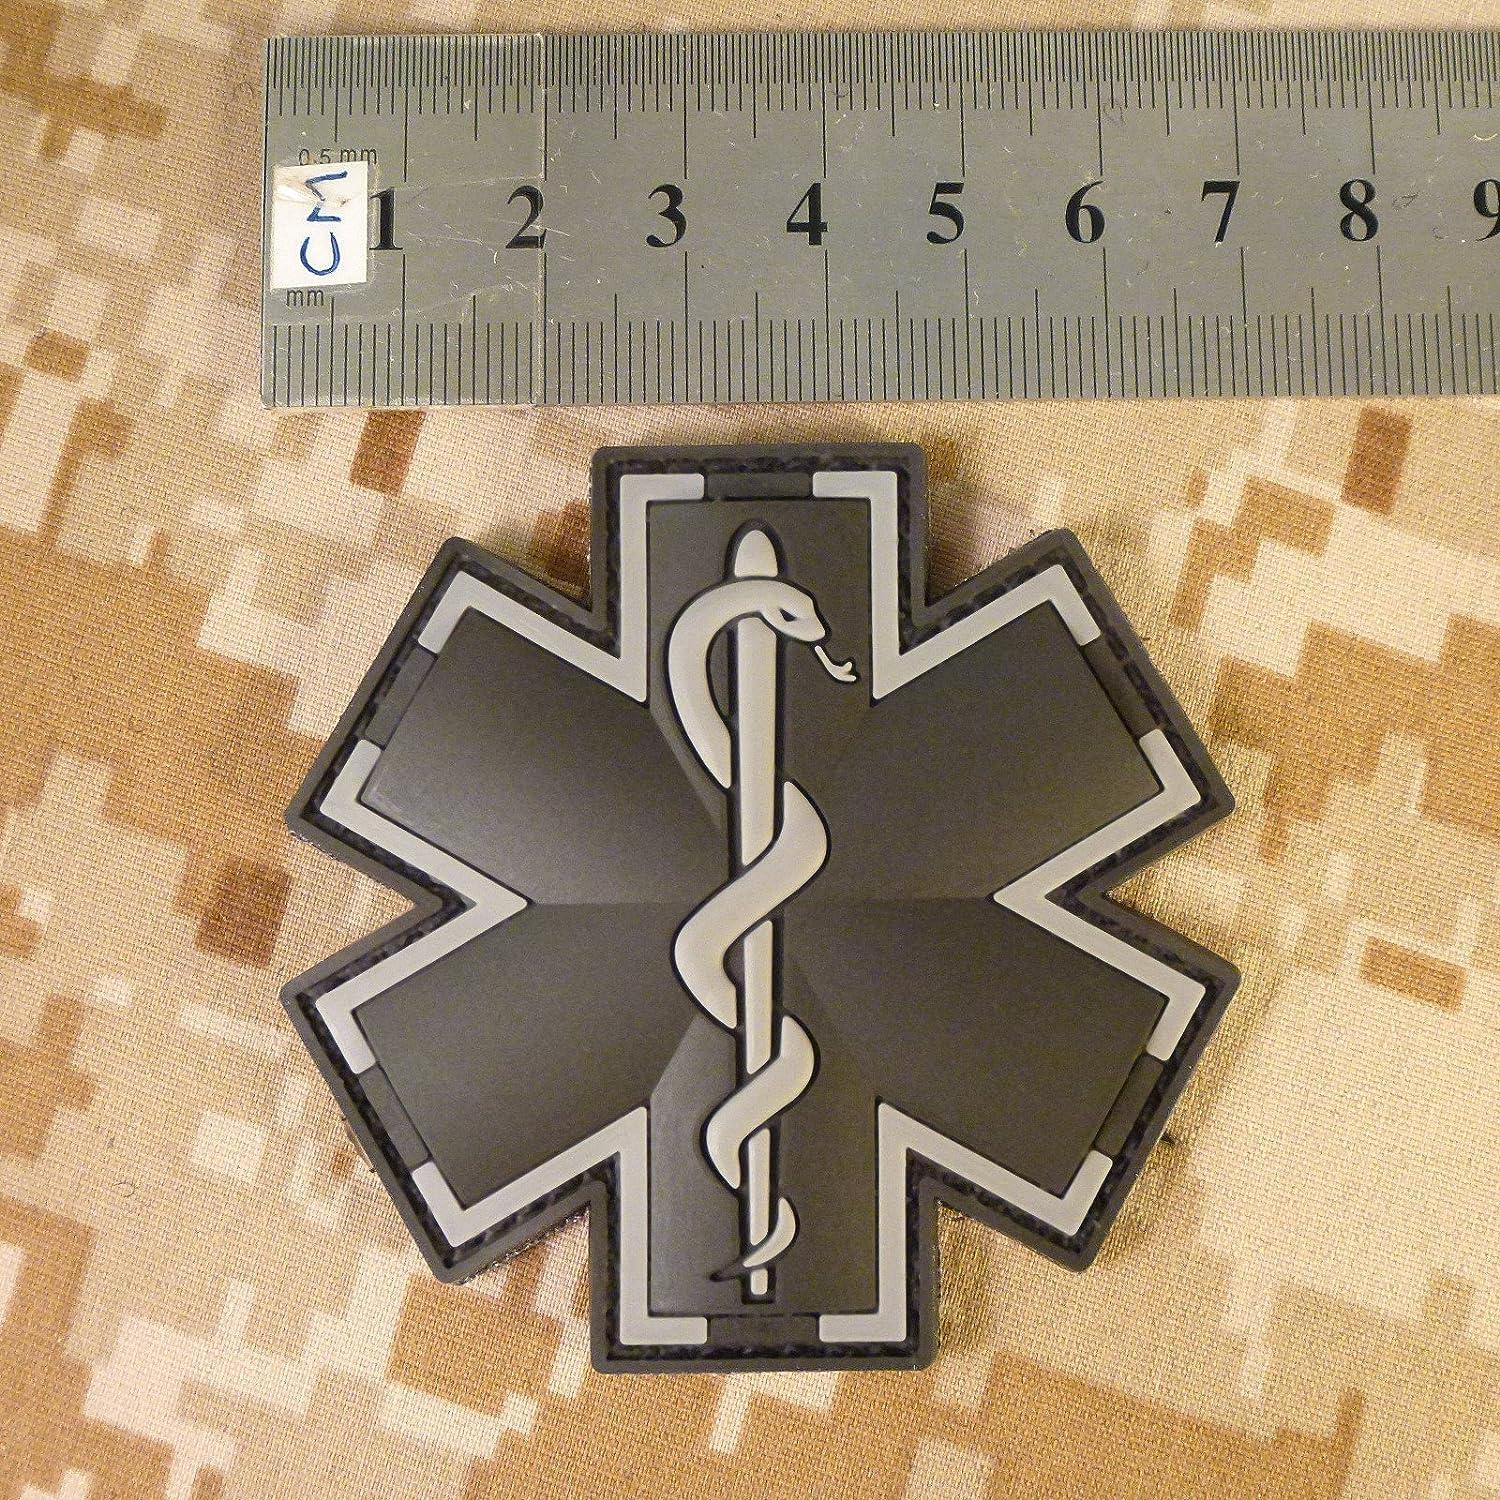 3D Medic Patch, Hook and Loop Backed